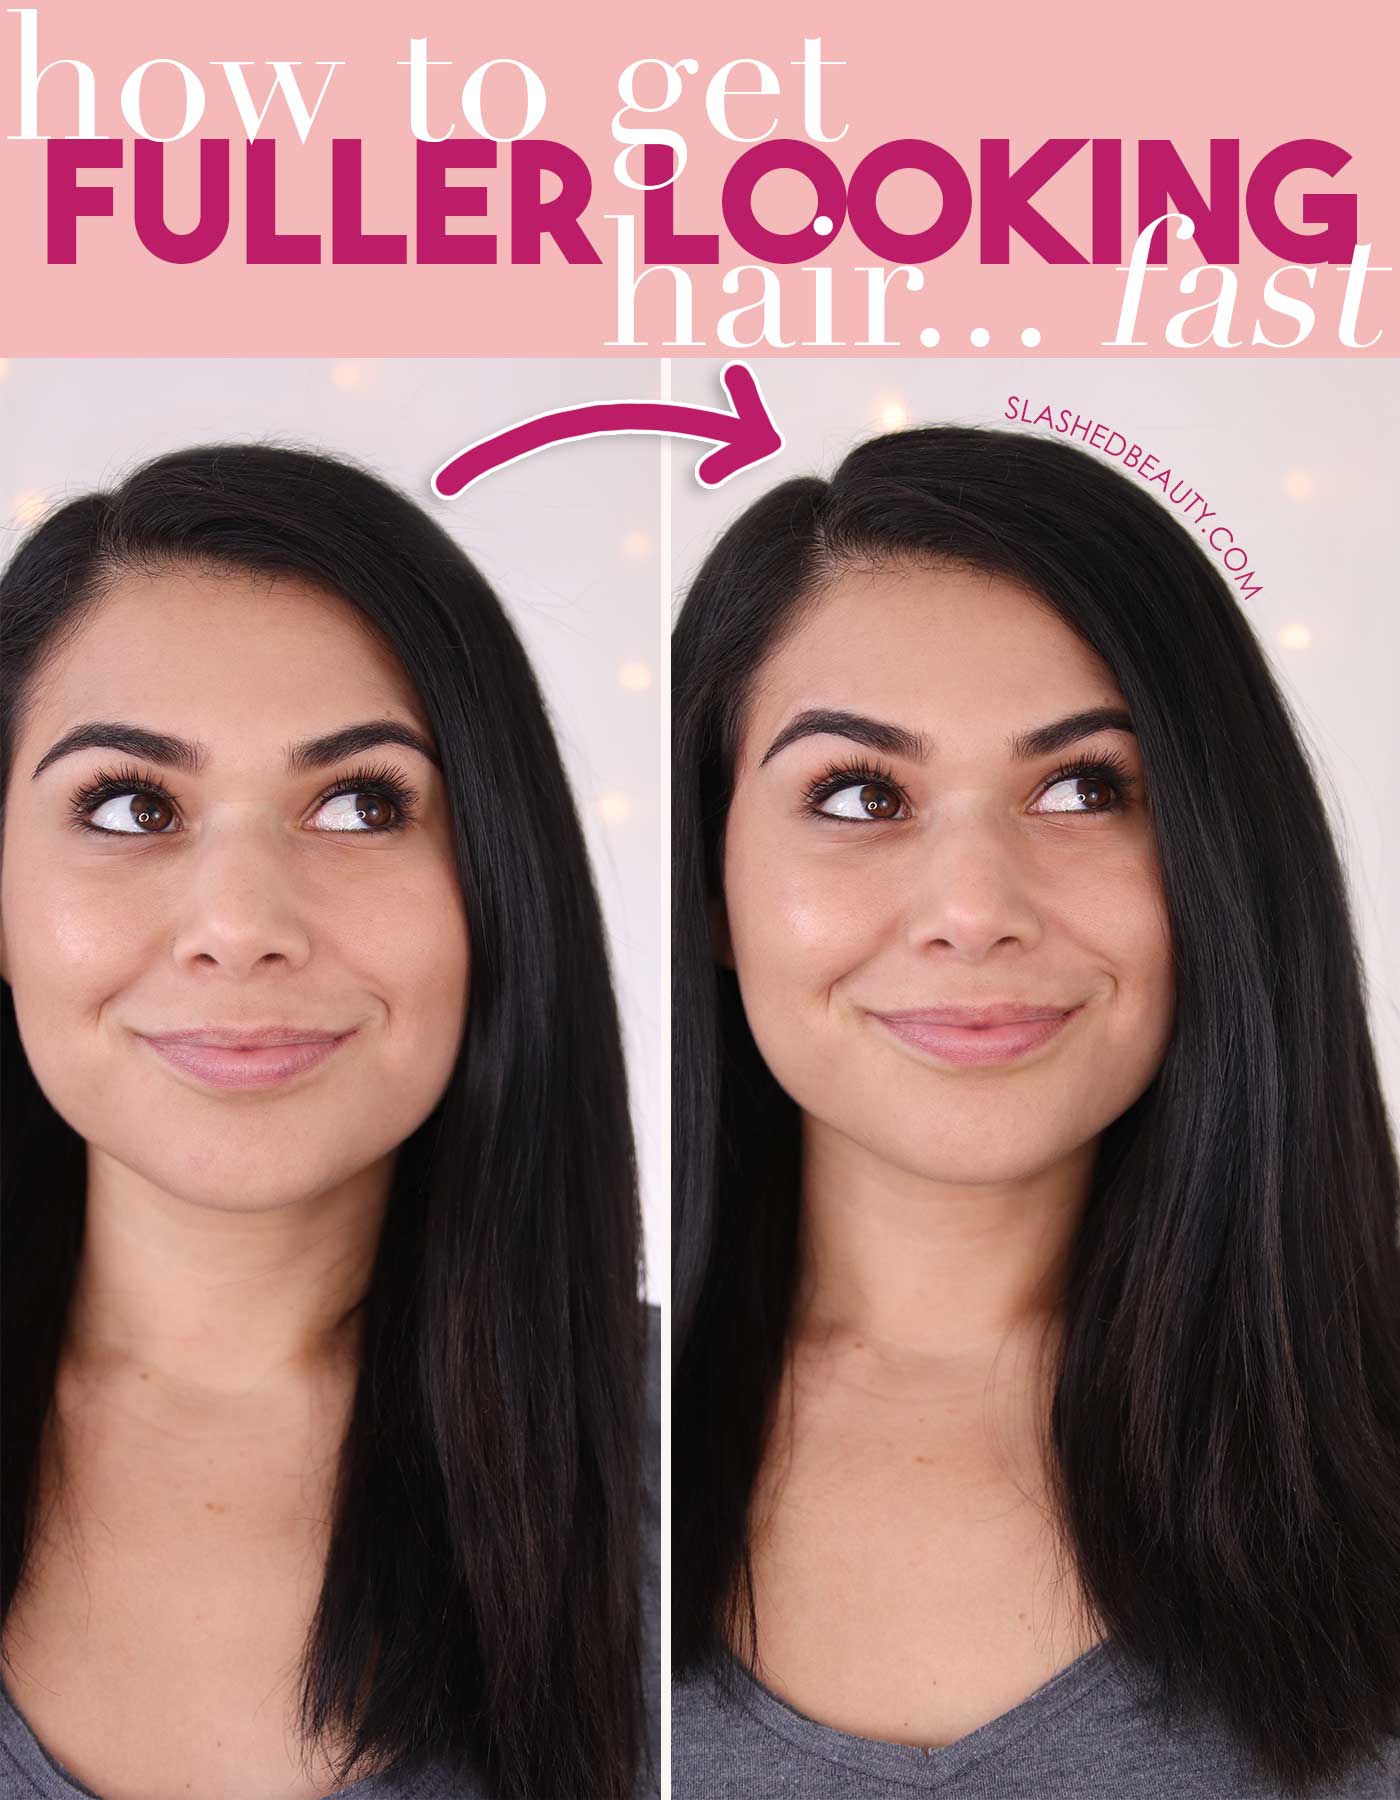 Four Hair Hacks to Get Fuller Hair Fast | Slashed Beauty